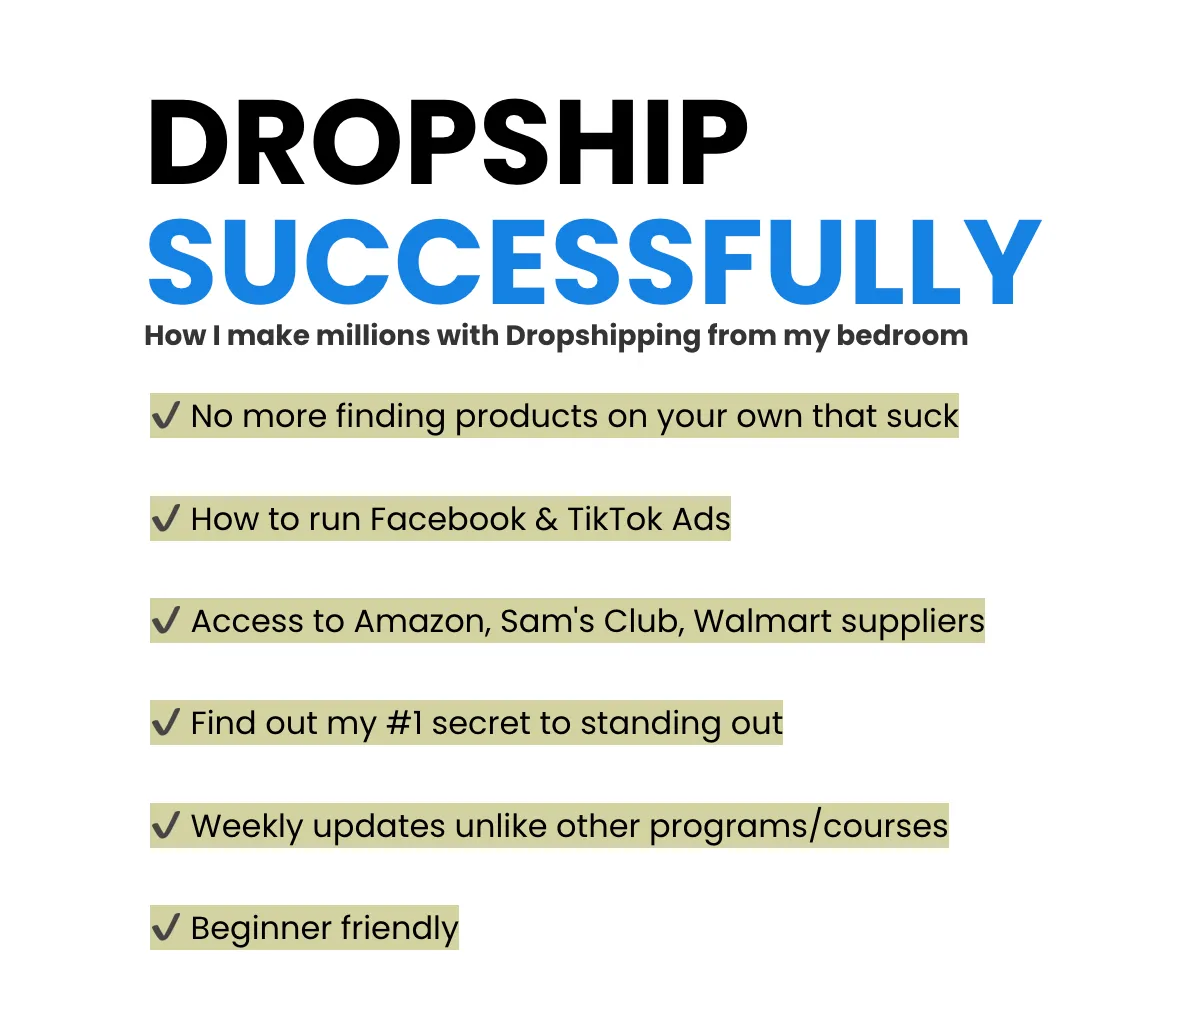 How Does Ecom Stride Academy Leverage The Dropshipping Business Model